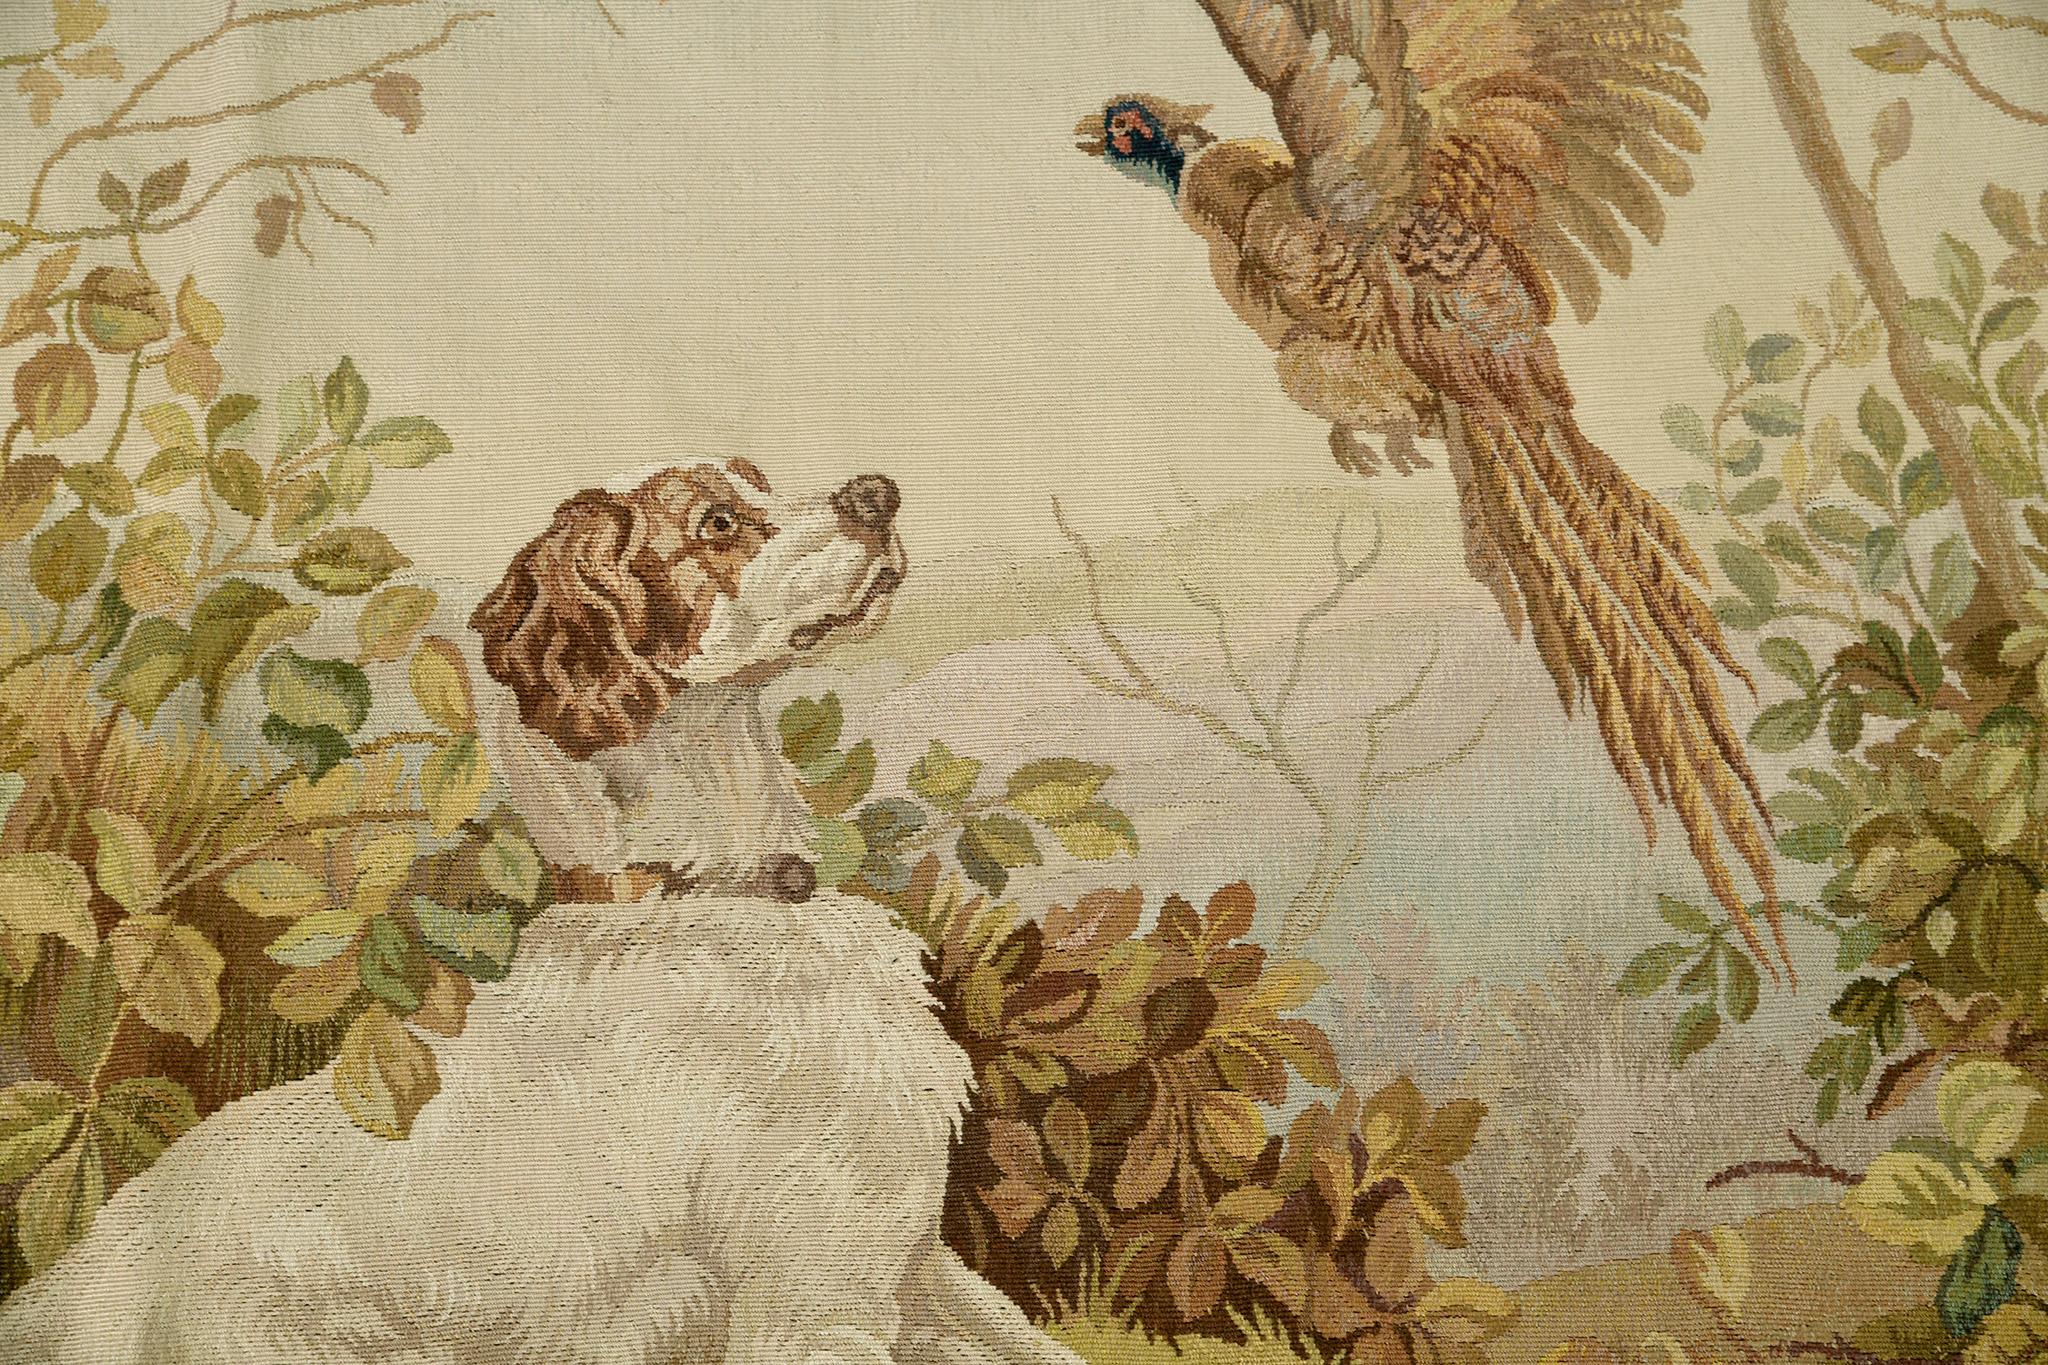 With its timeless sophisticated details of gold, neutral, green, and brown, this antique French Tapestry illustrates a playing dog and bird. A flatweave wool material is a brilliant complement to the palettes chosen. Not just a centerpiece but